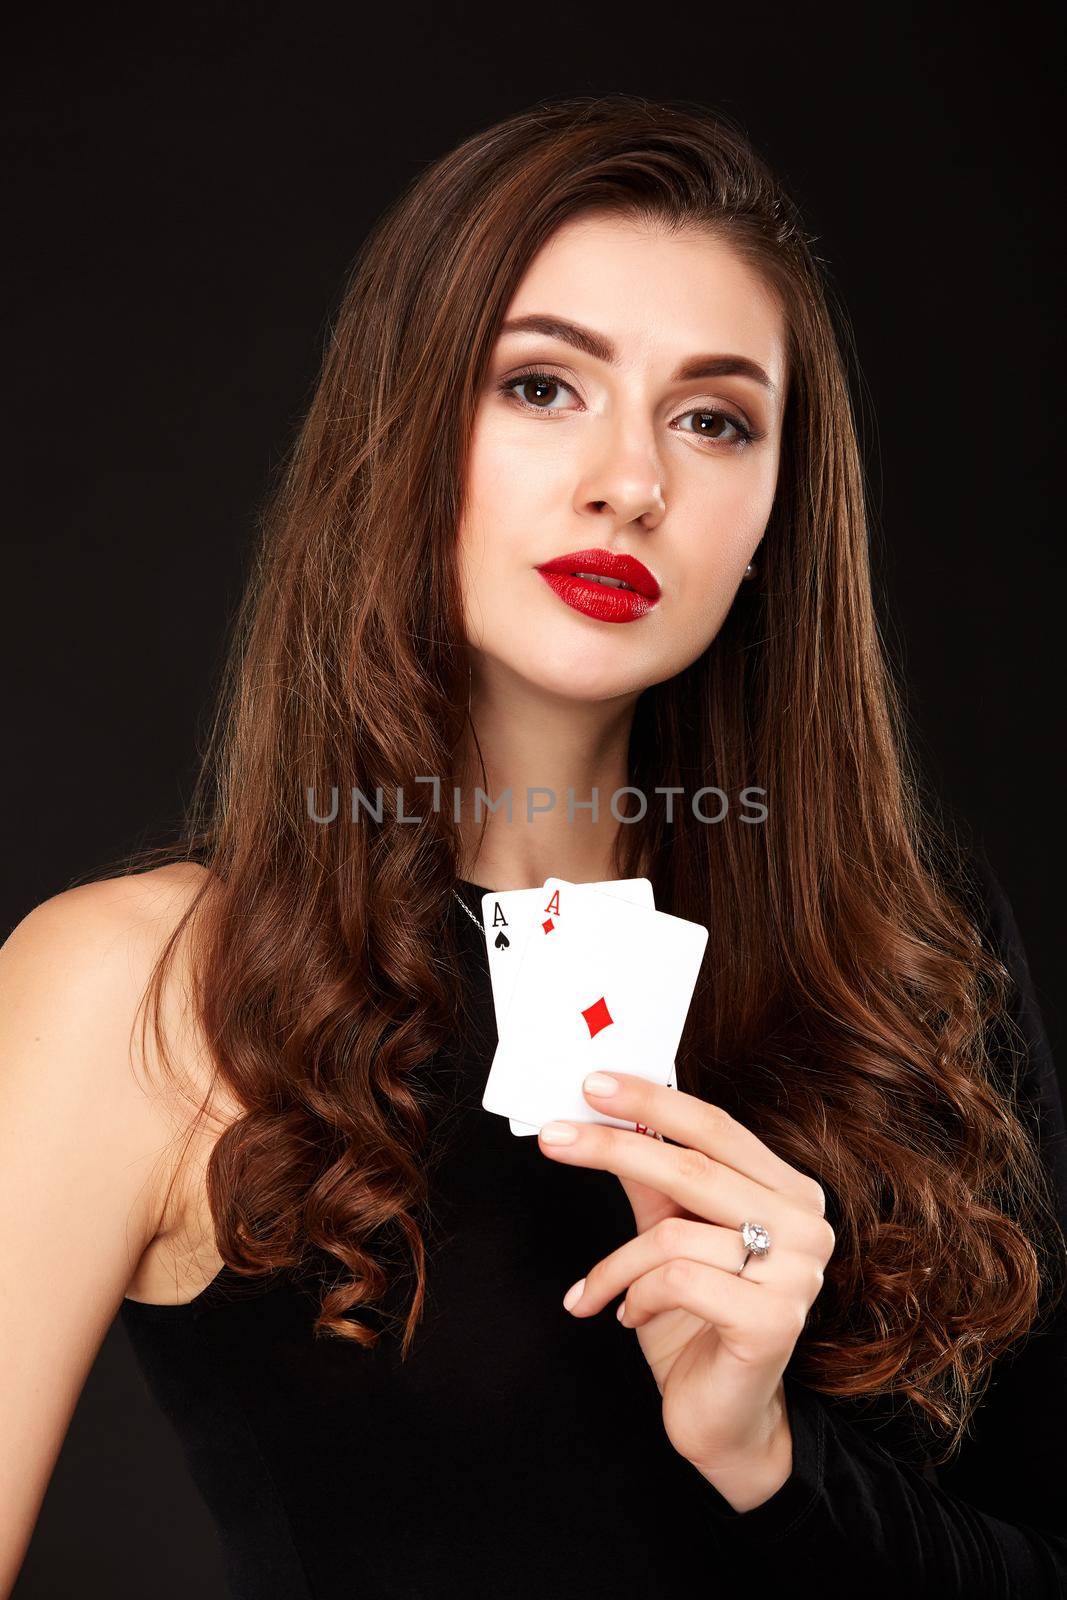 Sexy curly hair brunette in black dress posing with two aces cards in her hands, poker concept on black background. winning combination